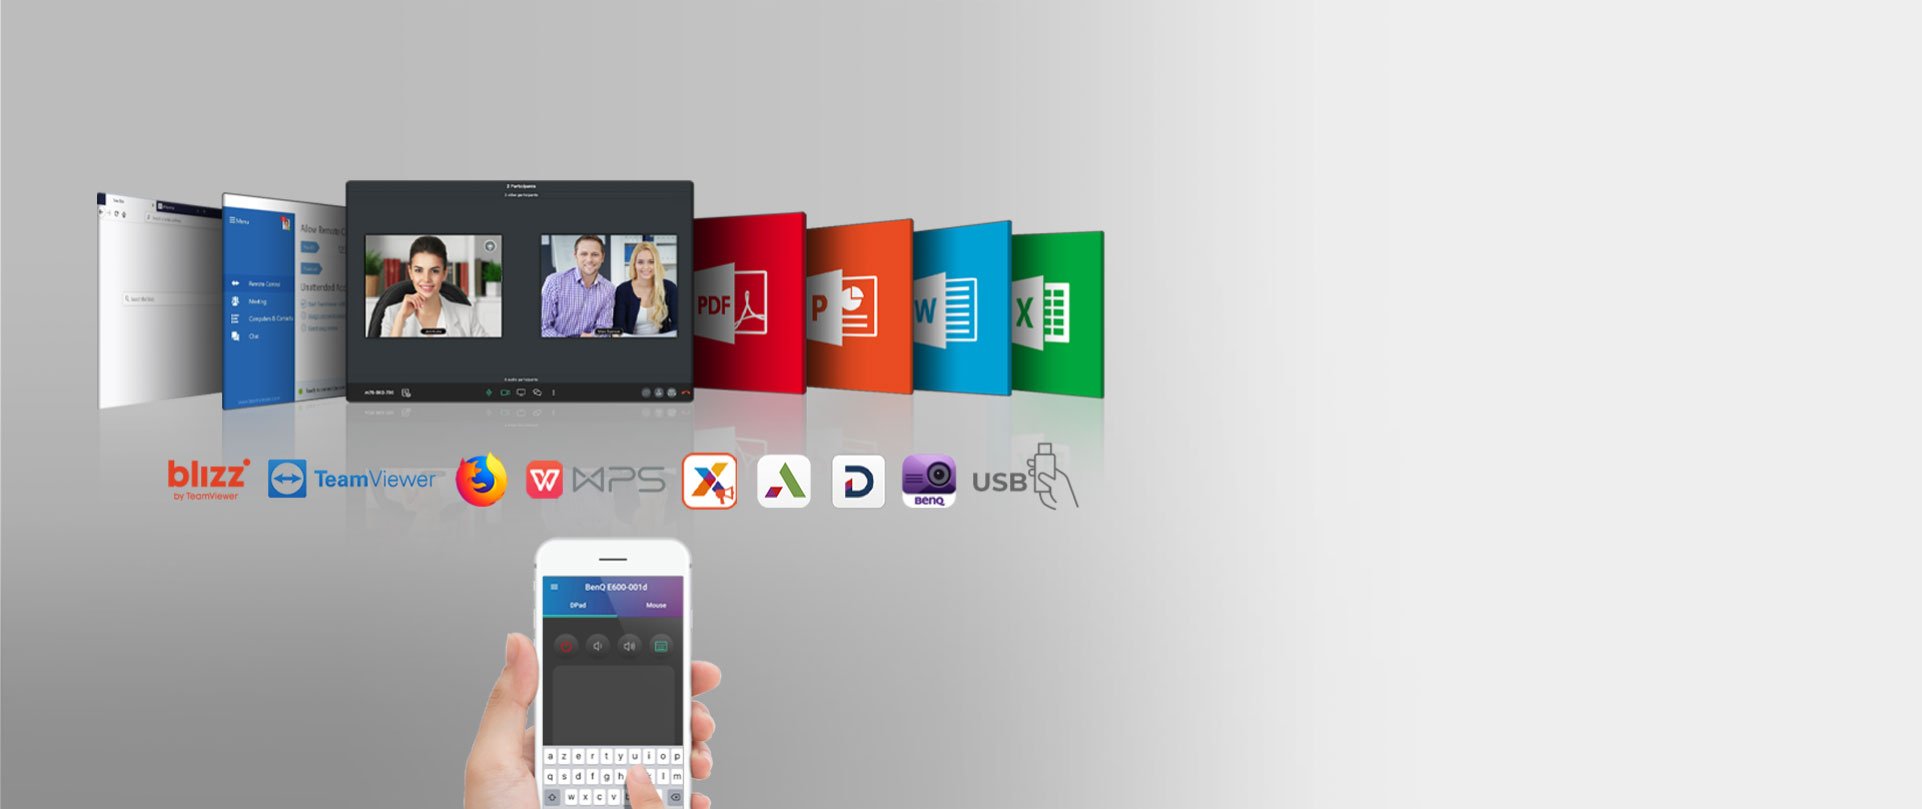 Business Apps make for effortless meetings: Firefox, TeamViewer, Blizz, WPS and useful BenQ exclusive apps.